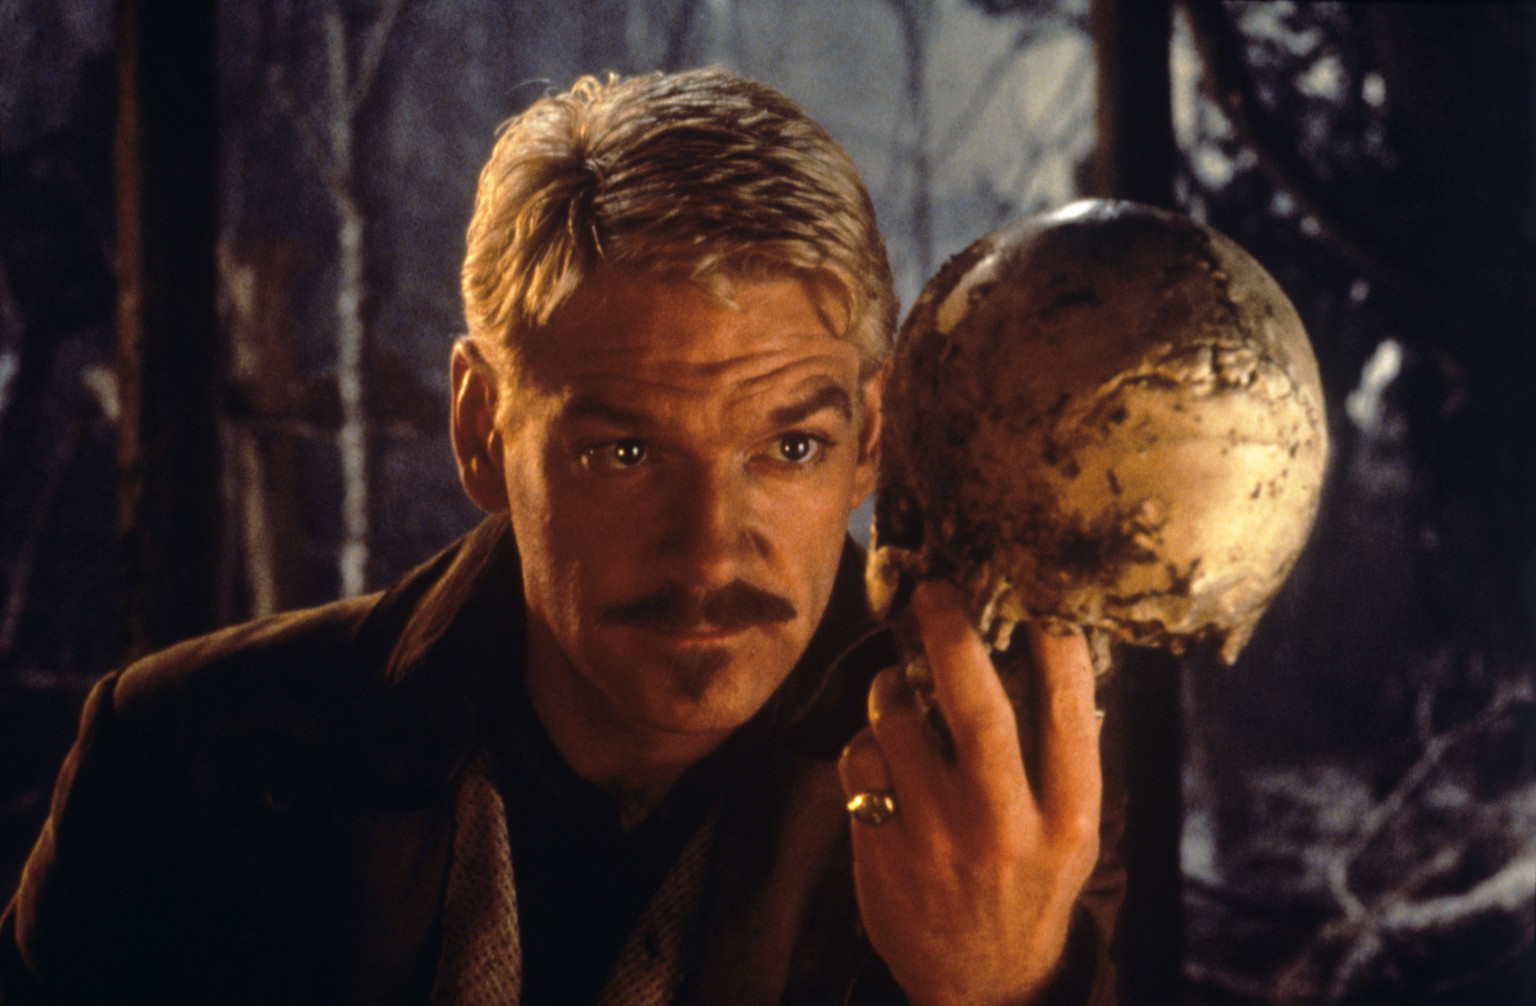 Nobody Has Scored at Least 17/20 on This General Knowledge Quiz. Will You? Kenneth Branagh in Hamlet